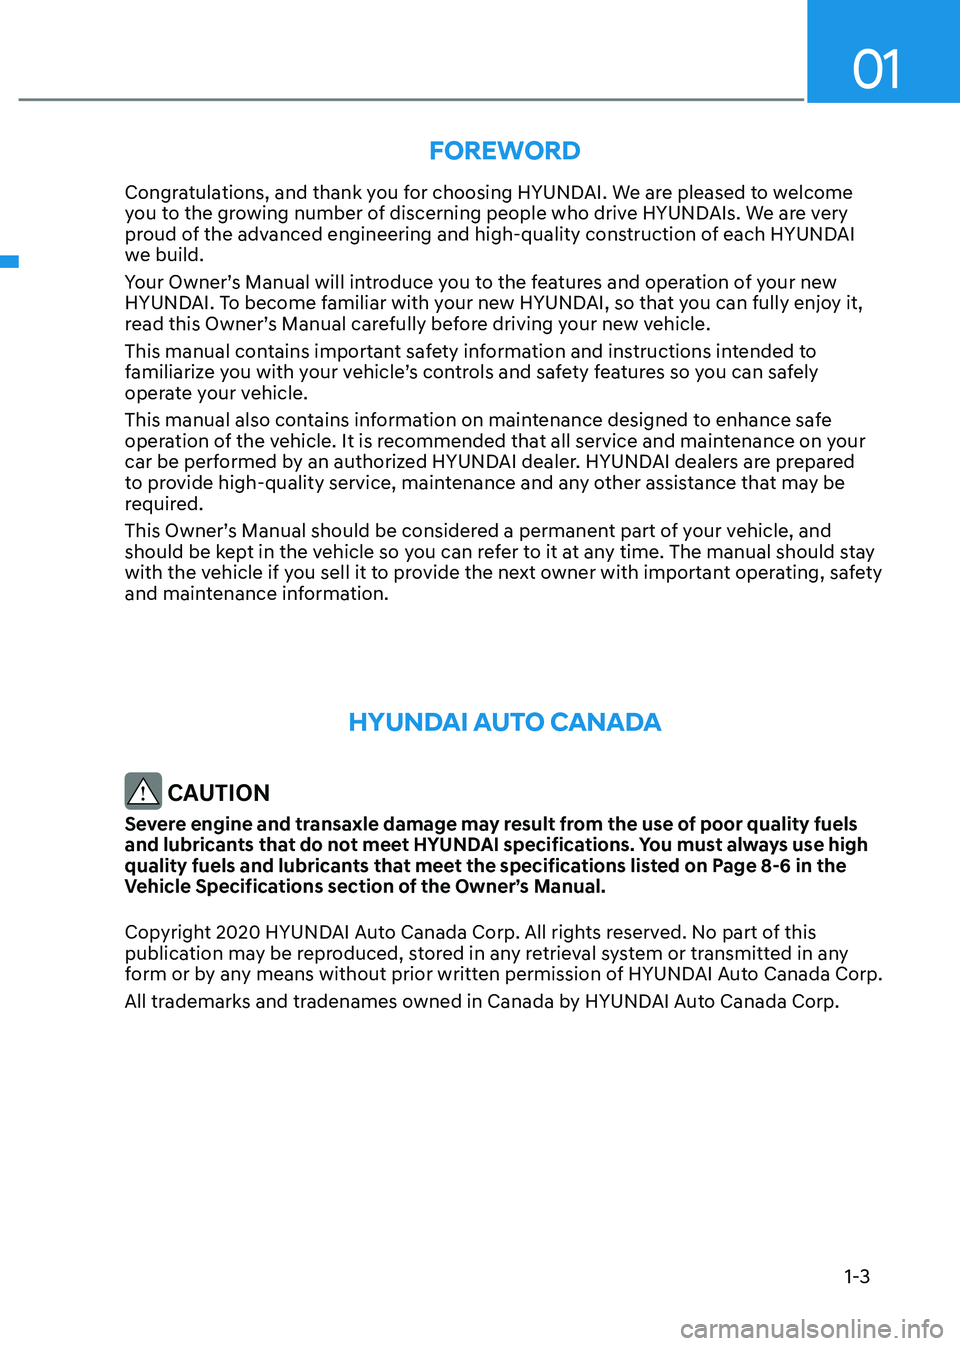 HYUNDAI KONA EV 2023  Owners Manual 01
1-3
Foreword
Congratulations, and thank you for choosing HYUNDAI. We are pleased to welcome  
you to the growing number of discerning people who drive HYUNDAIs. We are very 
proud of the advanced e